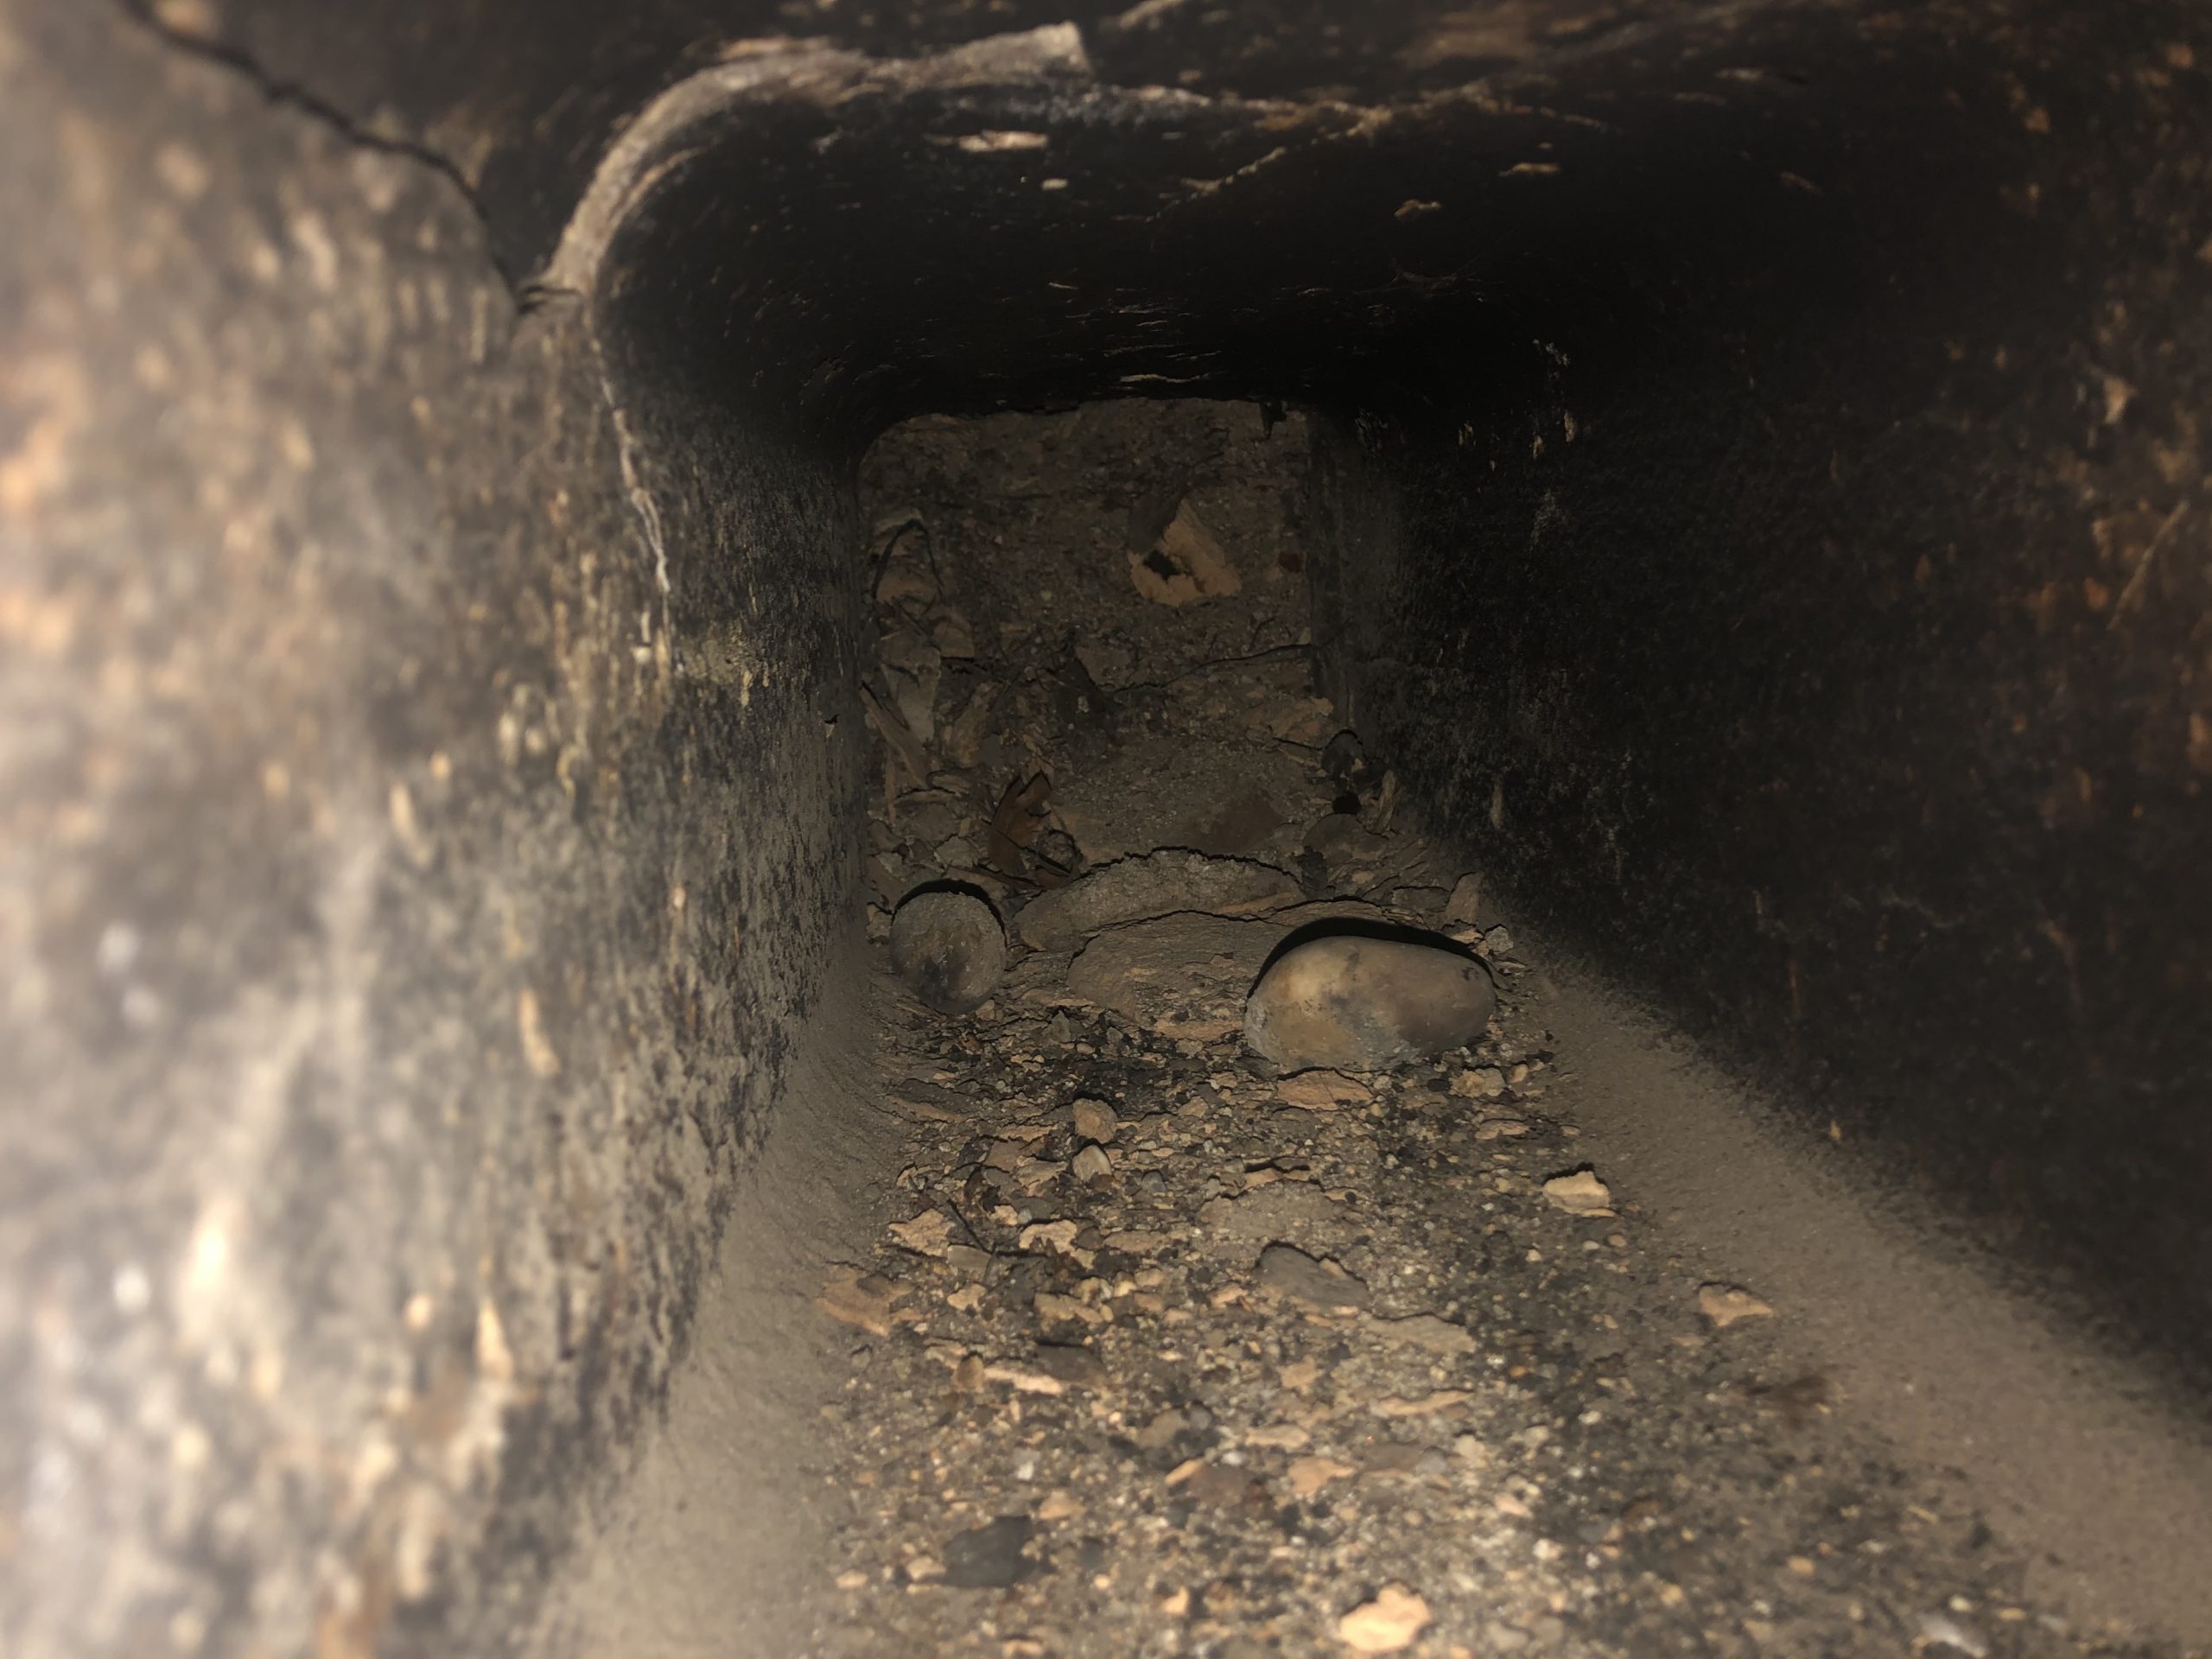 Creosote build-up in chimneys can lead to fires, which is why it's important to have chimney swept once a year.